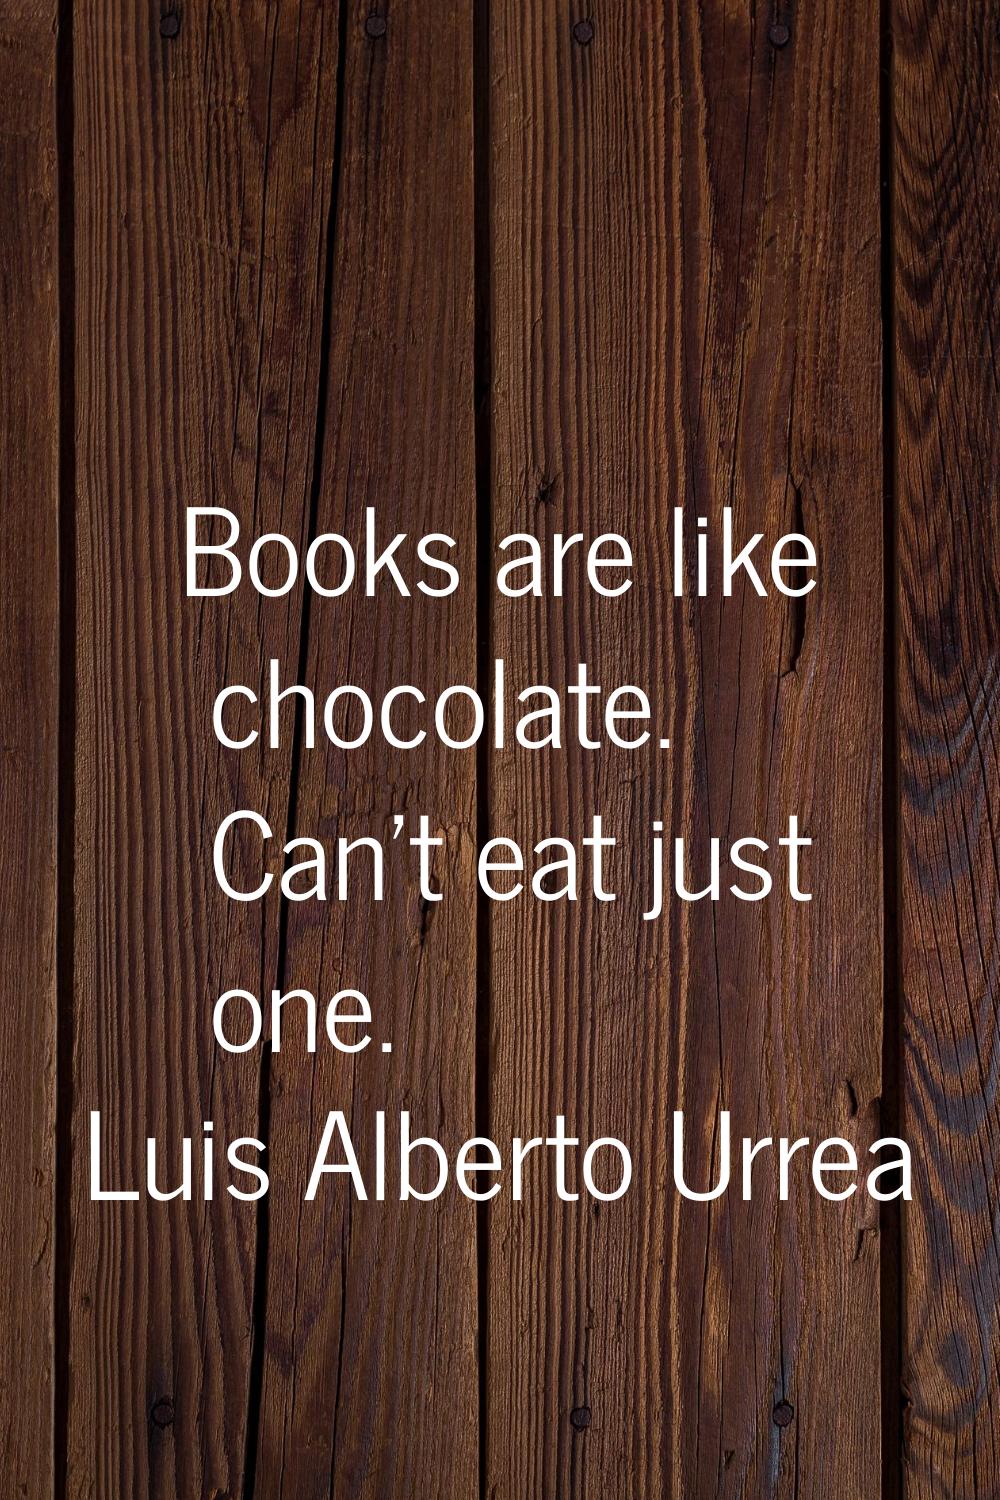 Books are like chocolate. Can't eat just one.